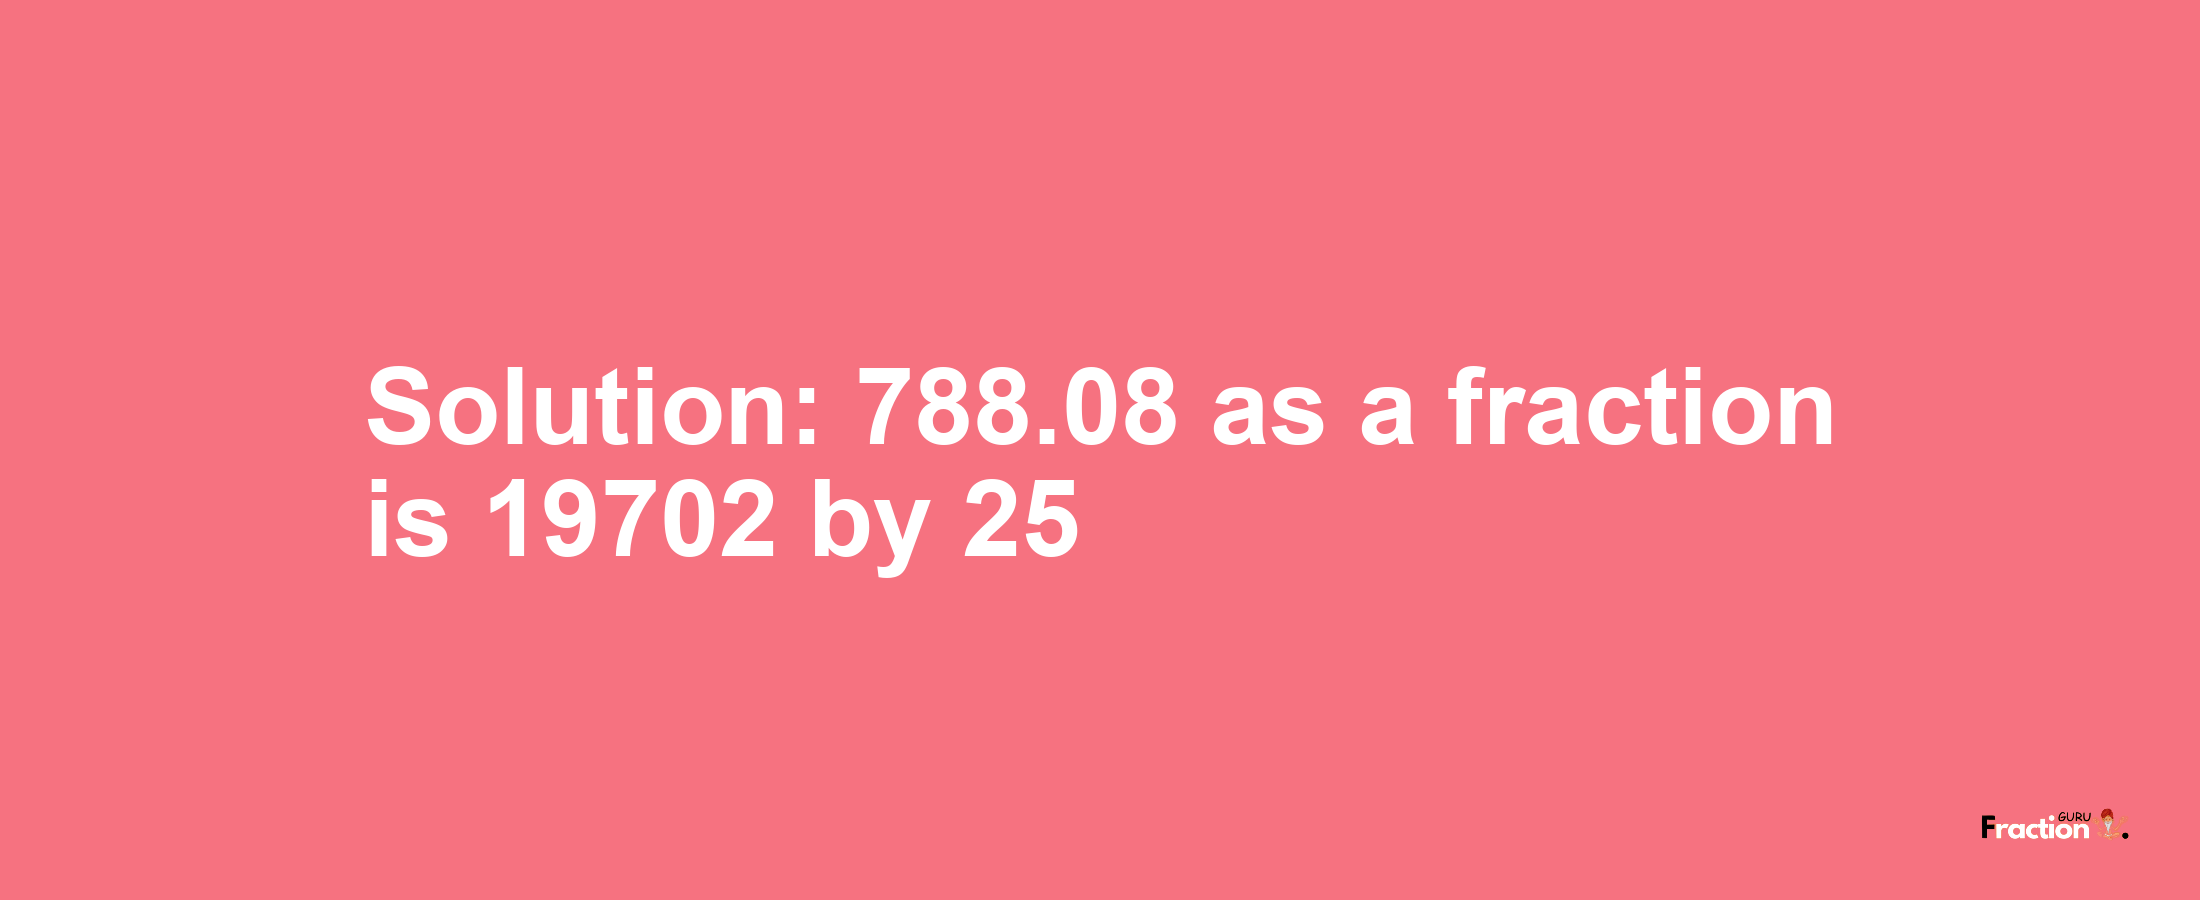 Solution:788.08 as a fraction is 19702/25